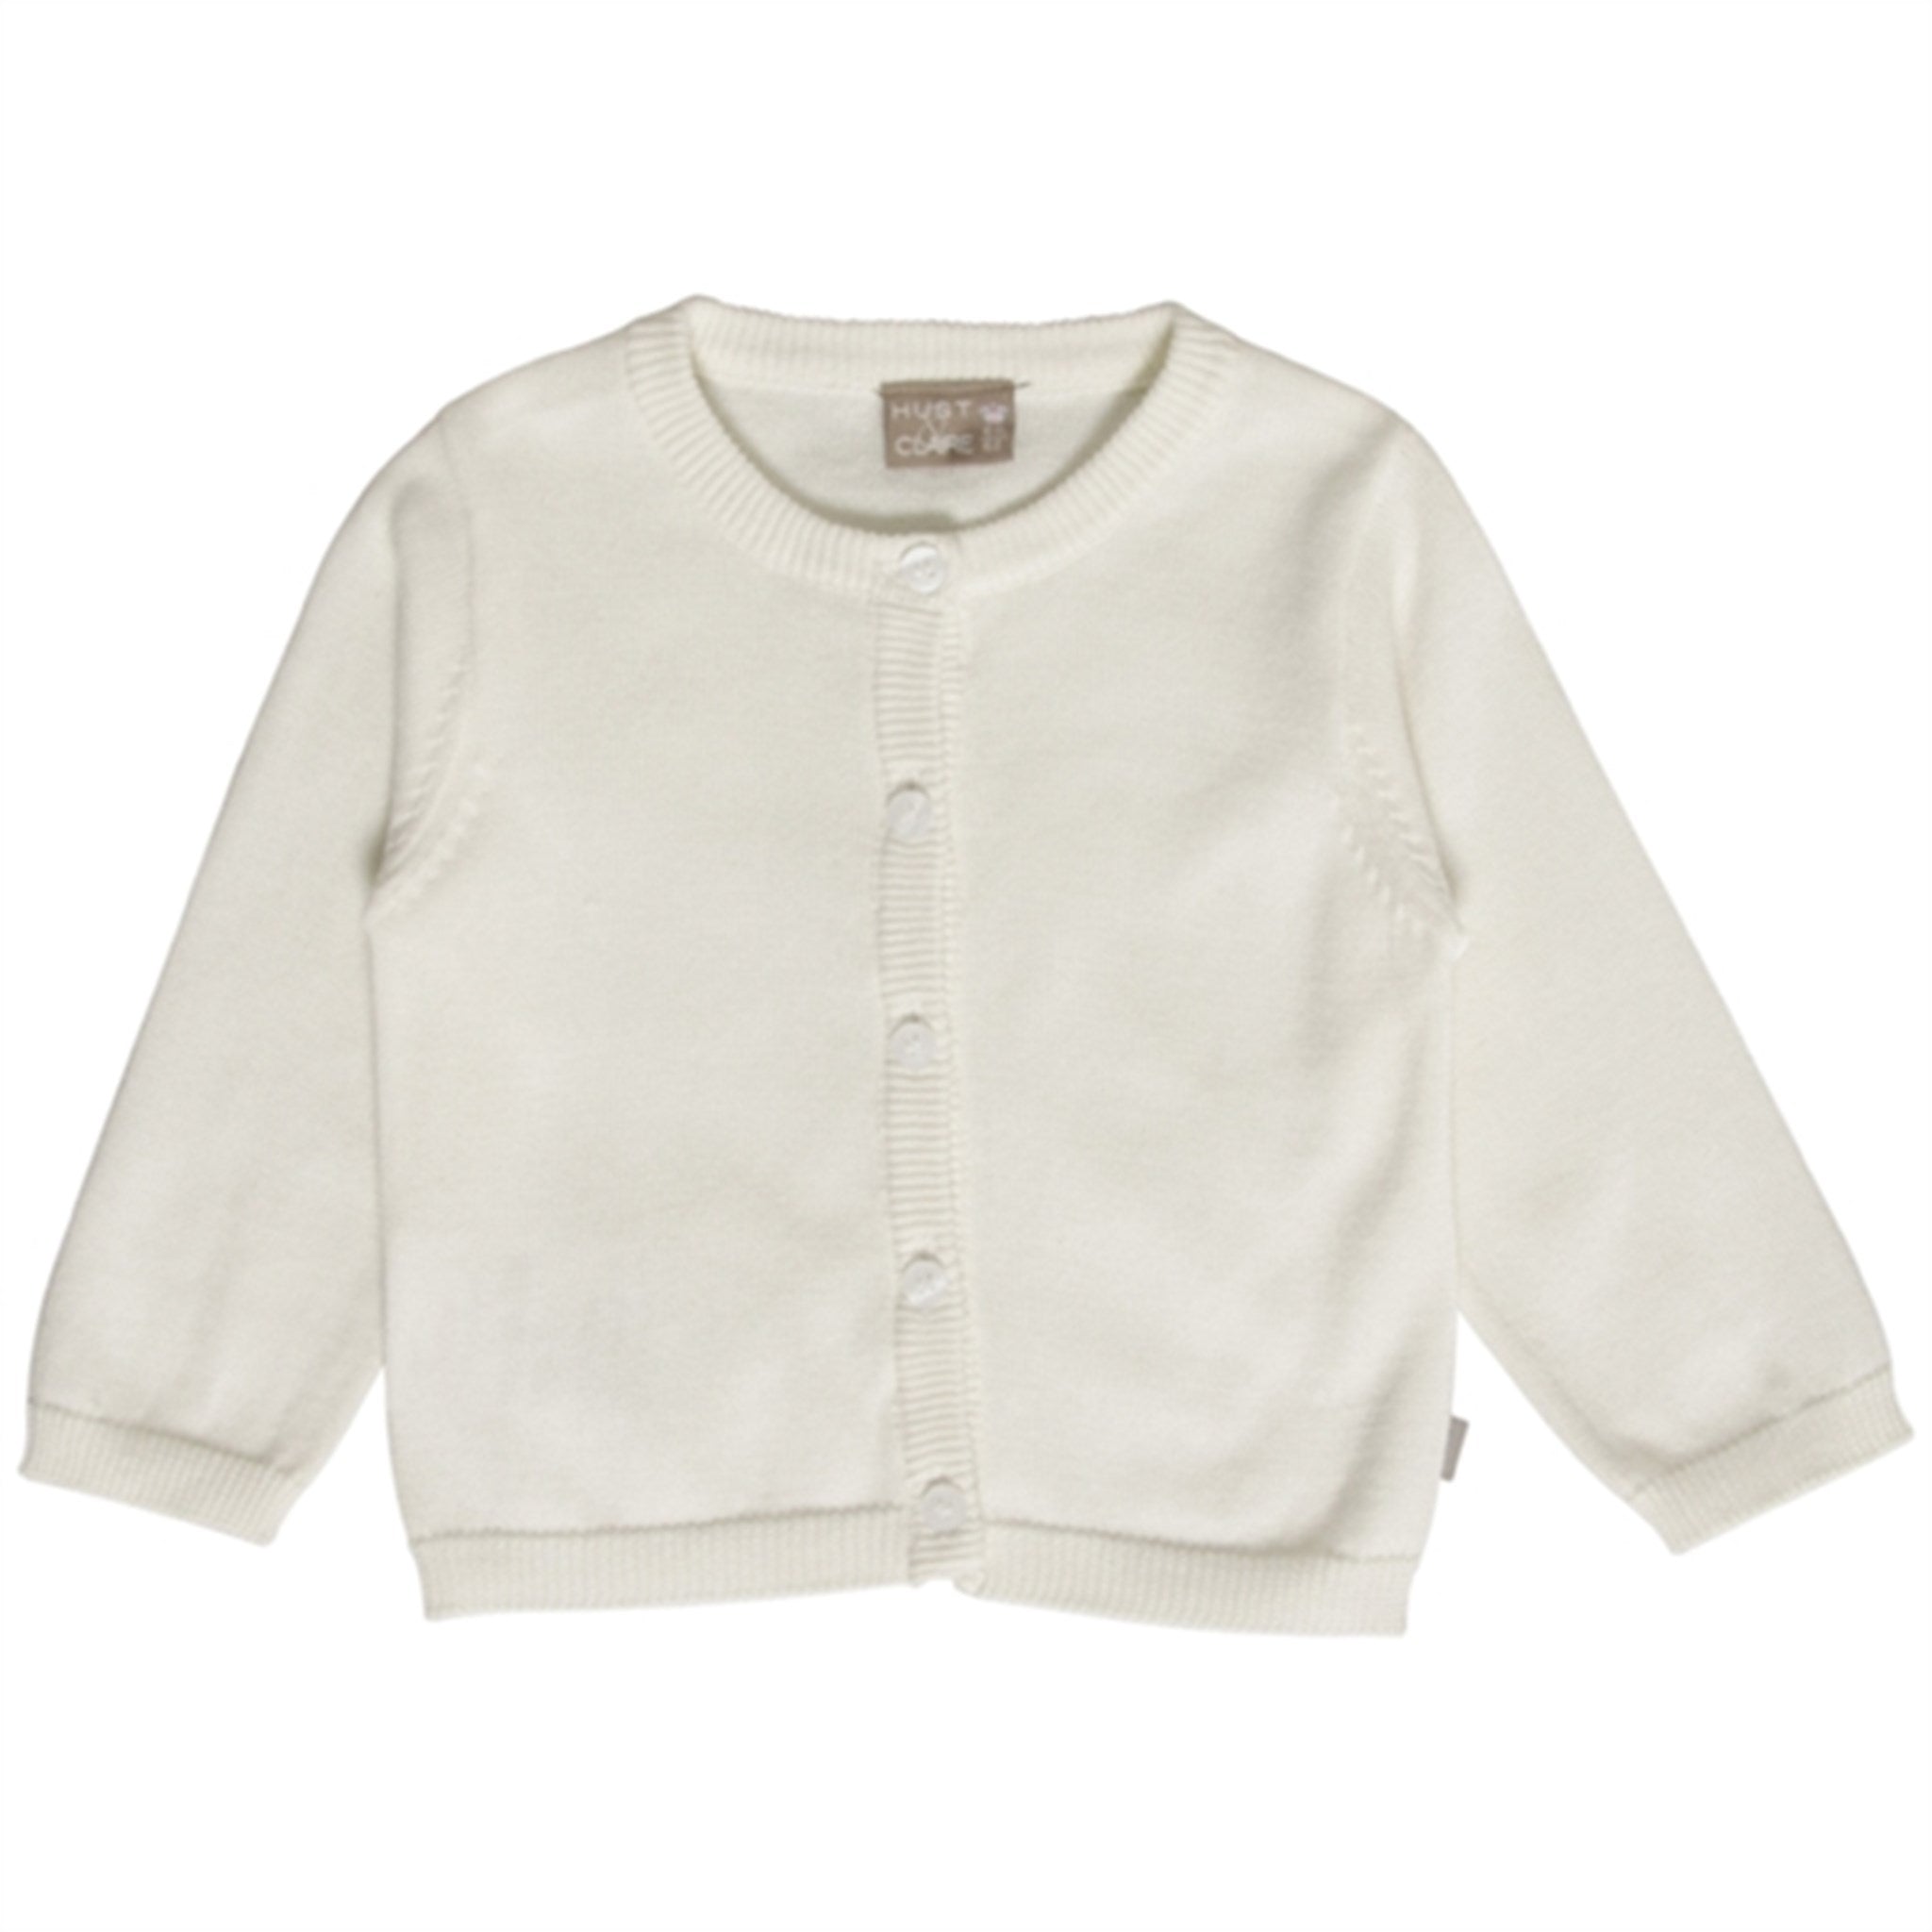 Hust & Claire Baby Ivory Claire Cardigan NOOS - Str. 74